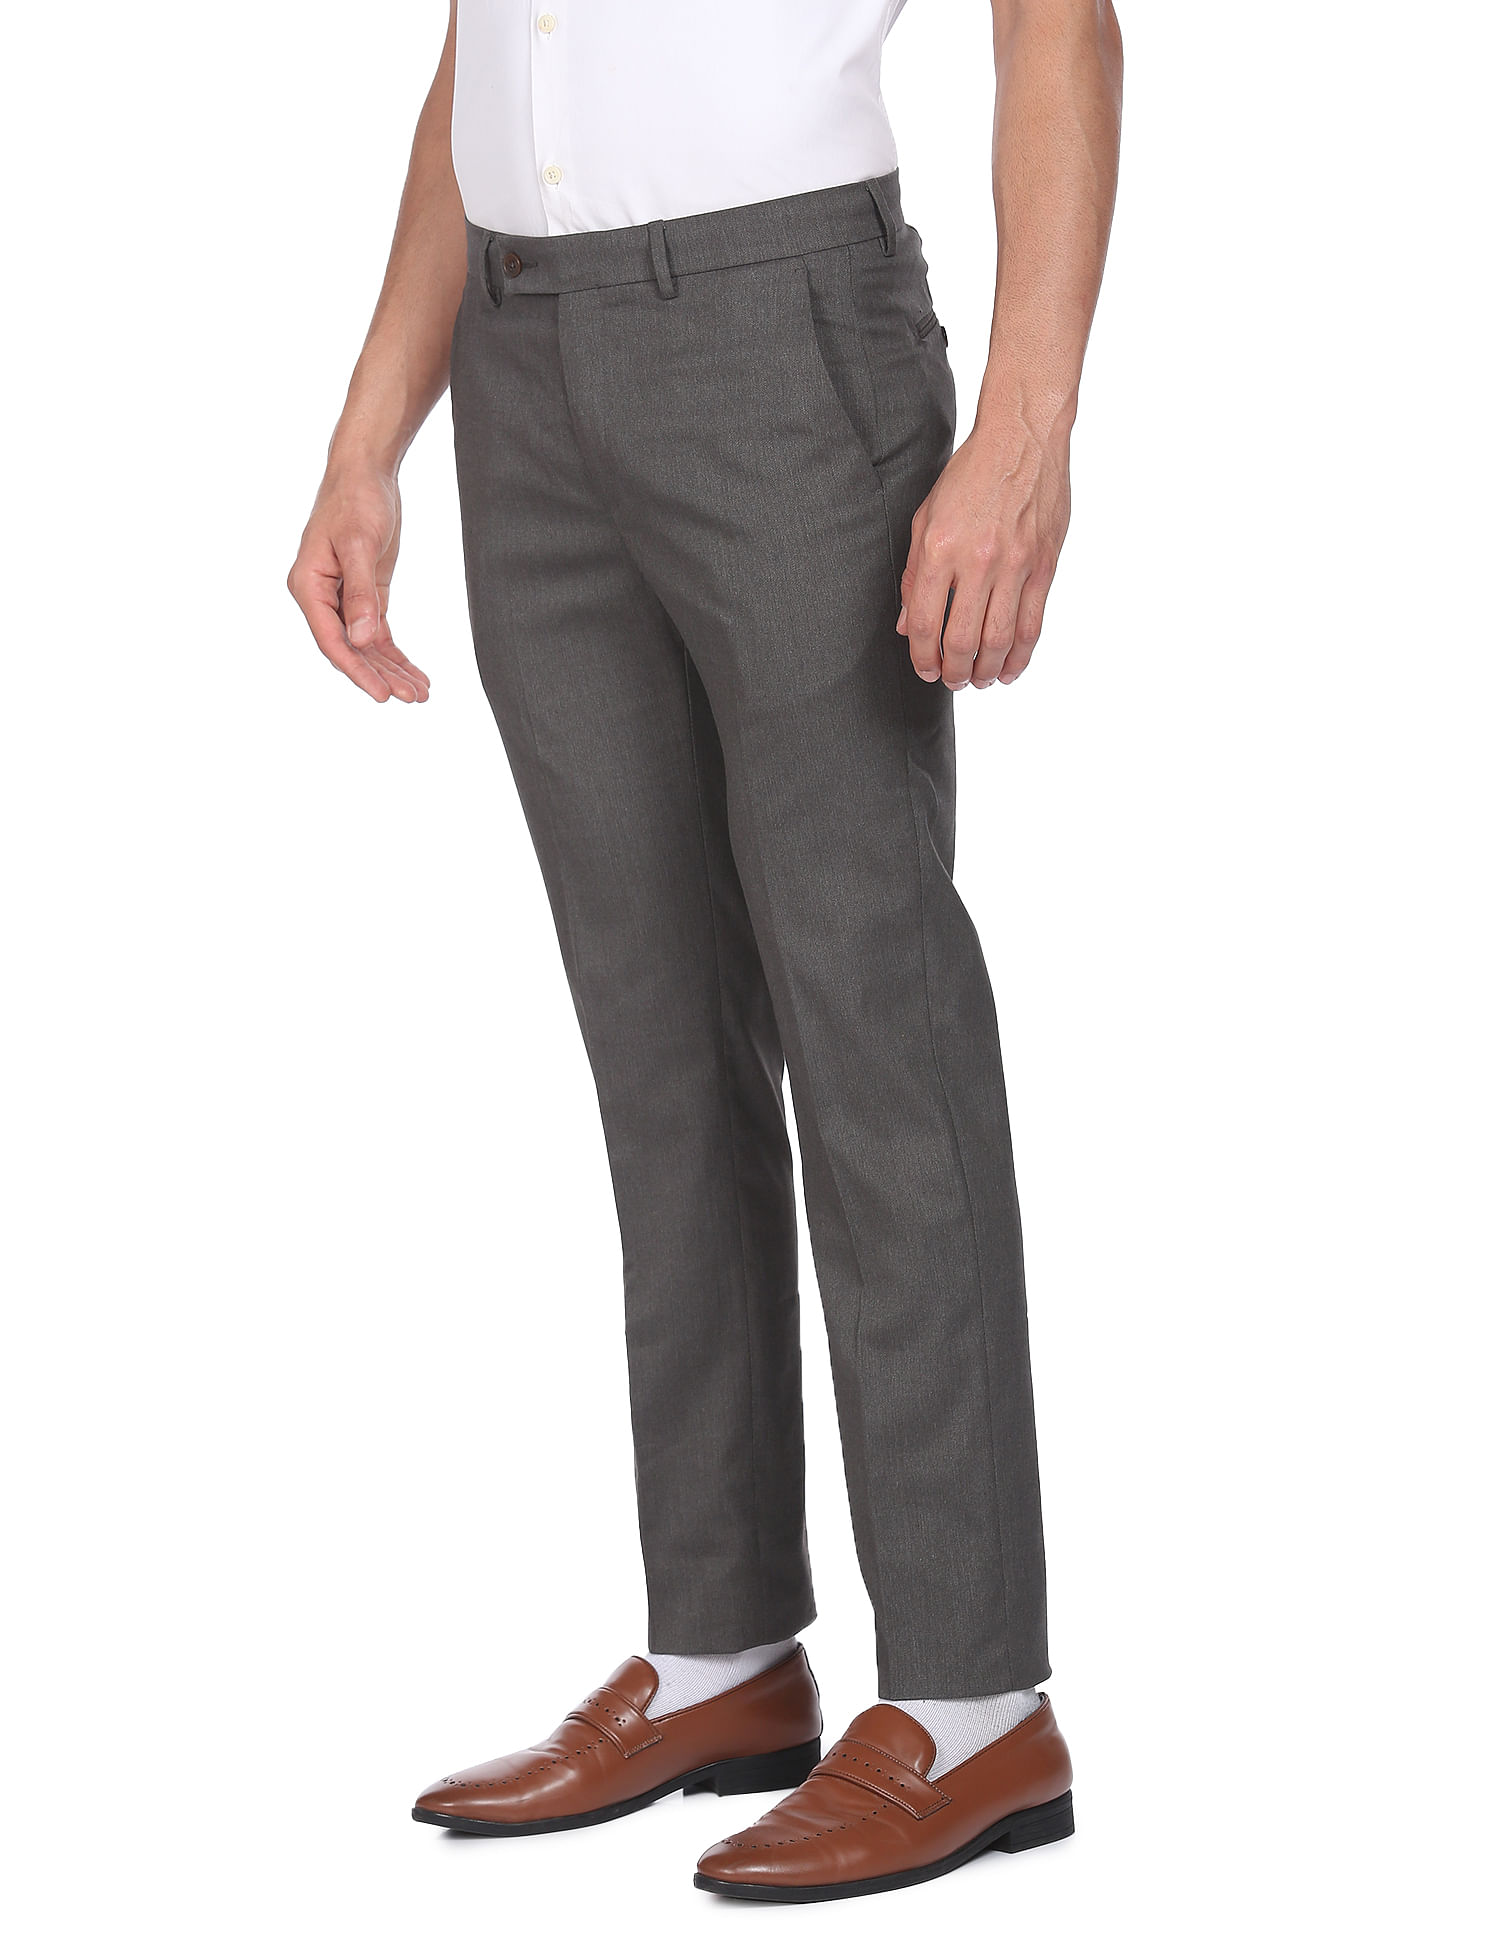 Victorious Men's Basic Casual Slim Fit Stretch Chino Pants DL1250 -  Charcoal - 36/30 - Walmart.com